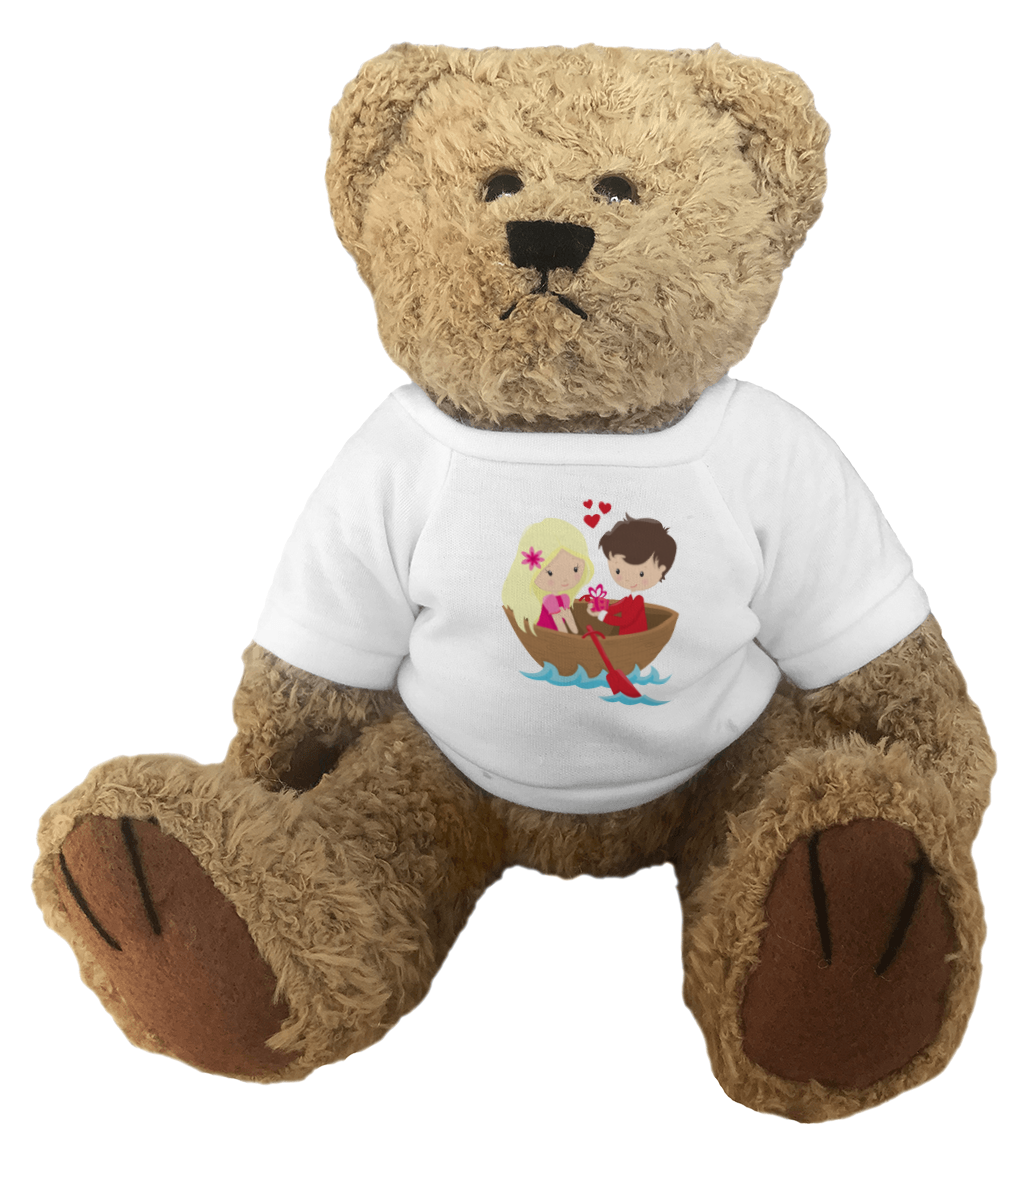 Why Are Teddy Bear’s a Great Gift